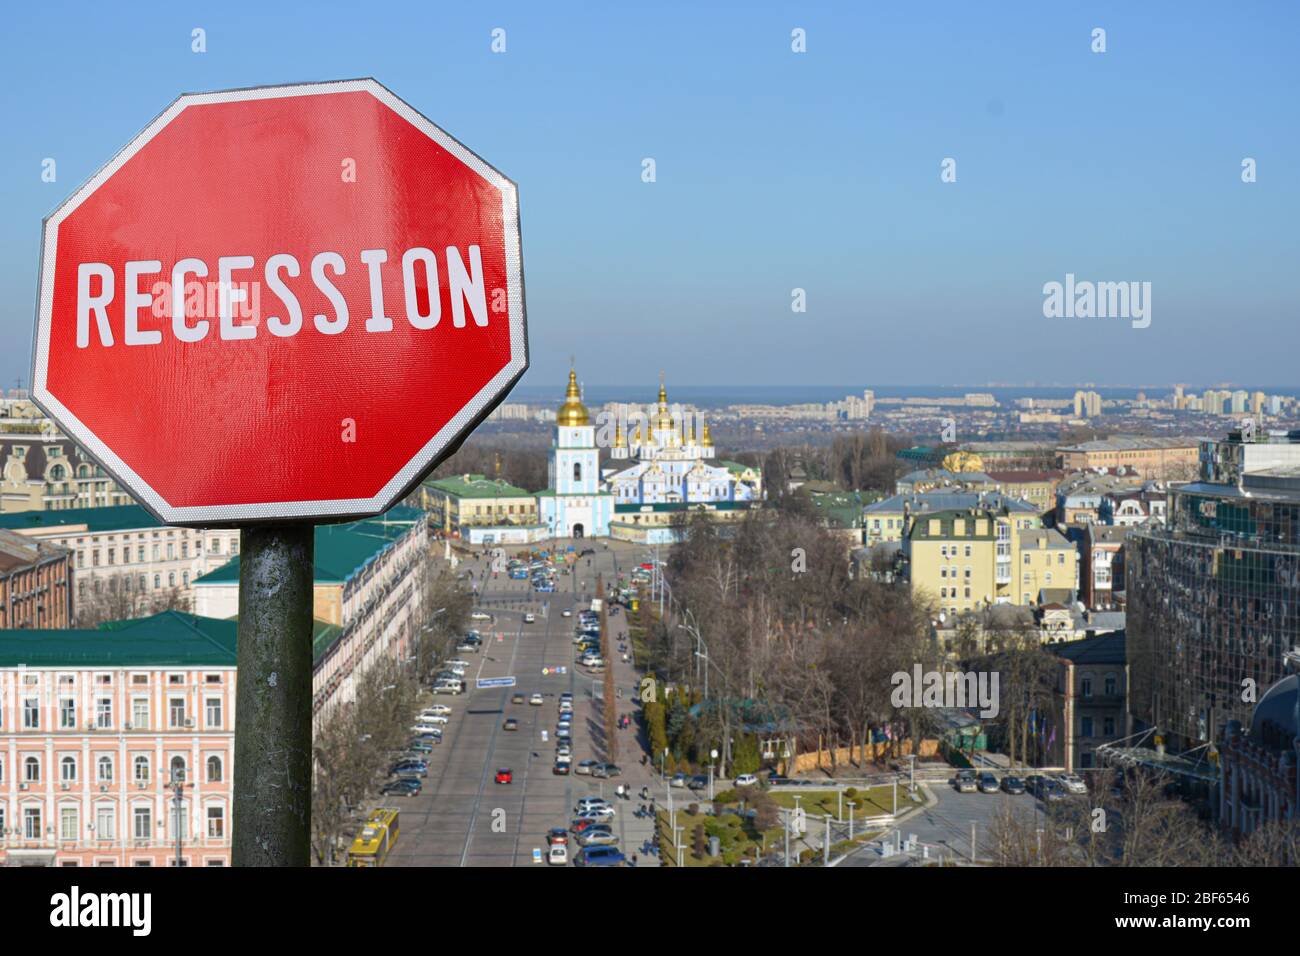 Recession stop sign with view of Kyiv, Ukraine. Financial crash in world economy because of coronavirus pandemic. Global economic crisis, recession. Stock Photo